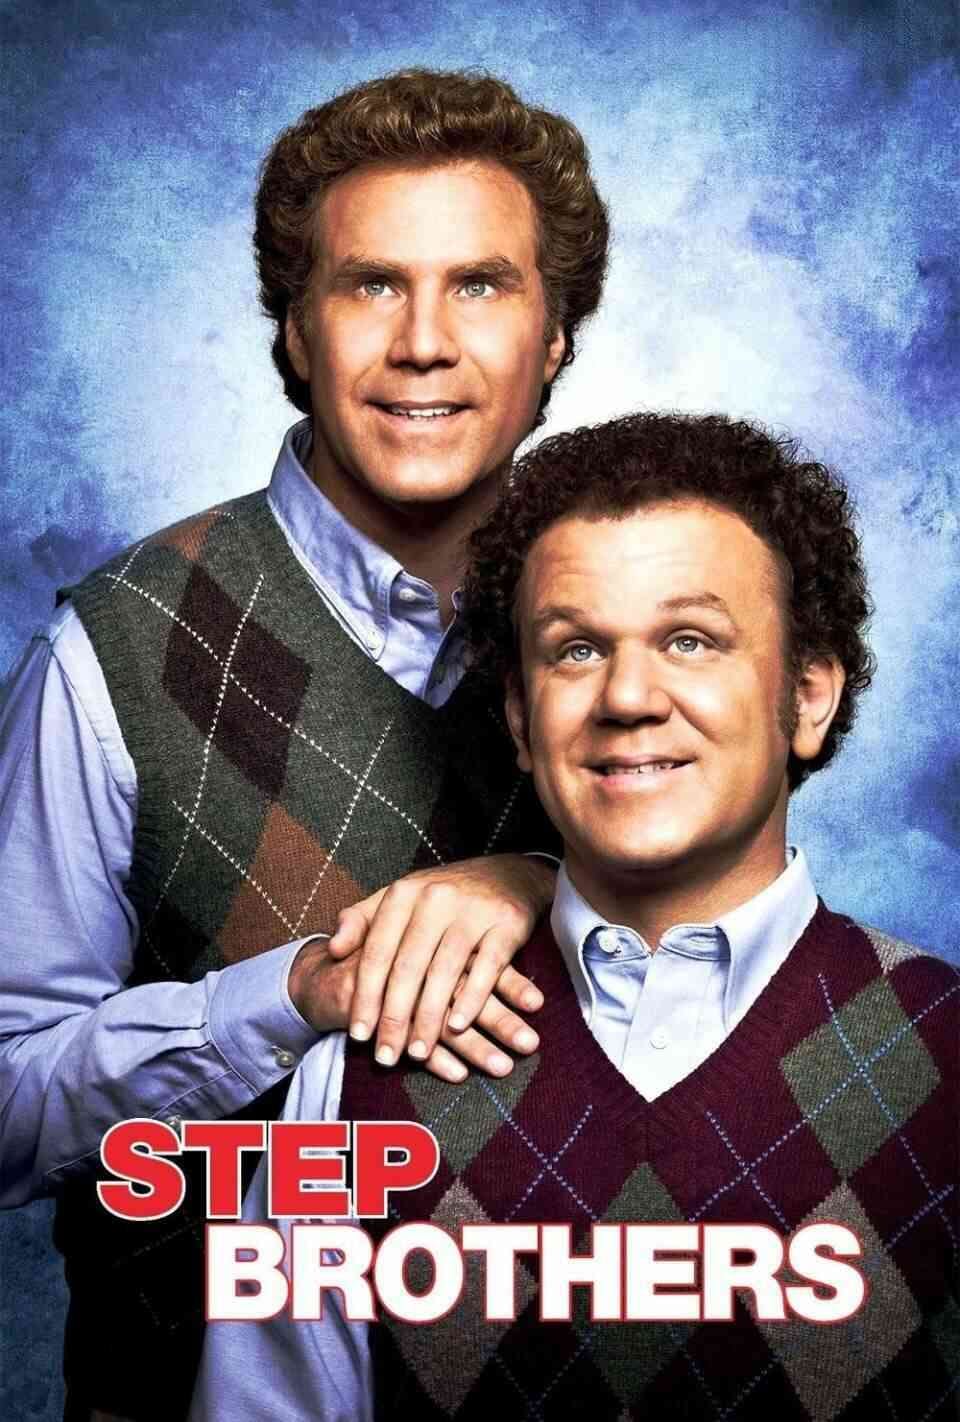 Read Step Brothers screenplay (poster)